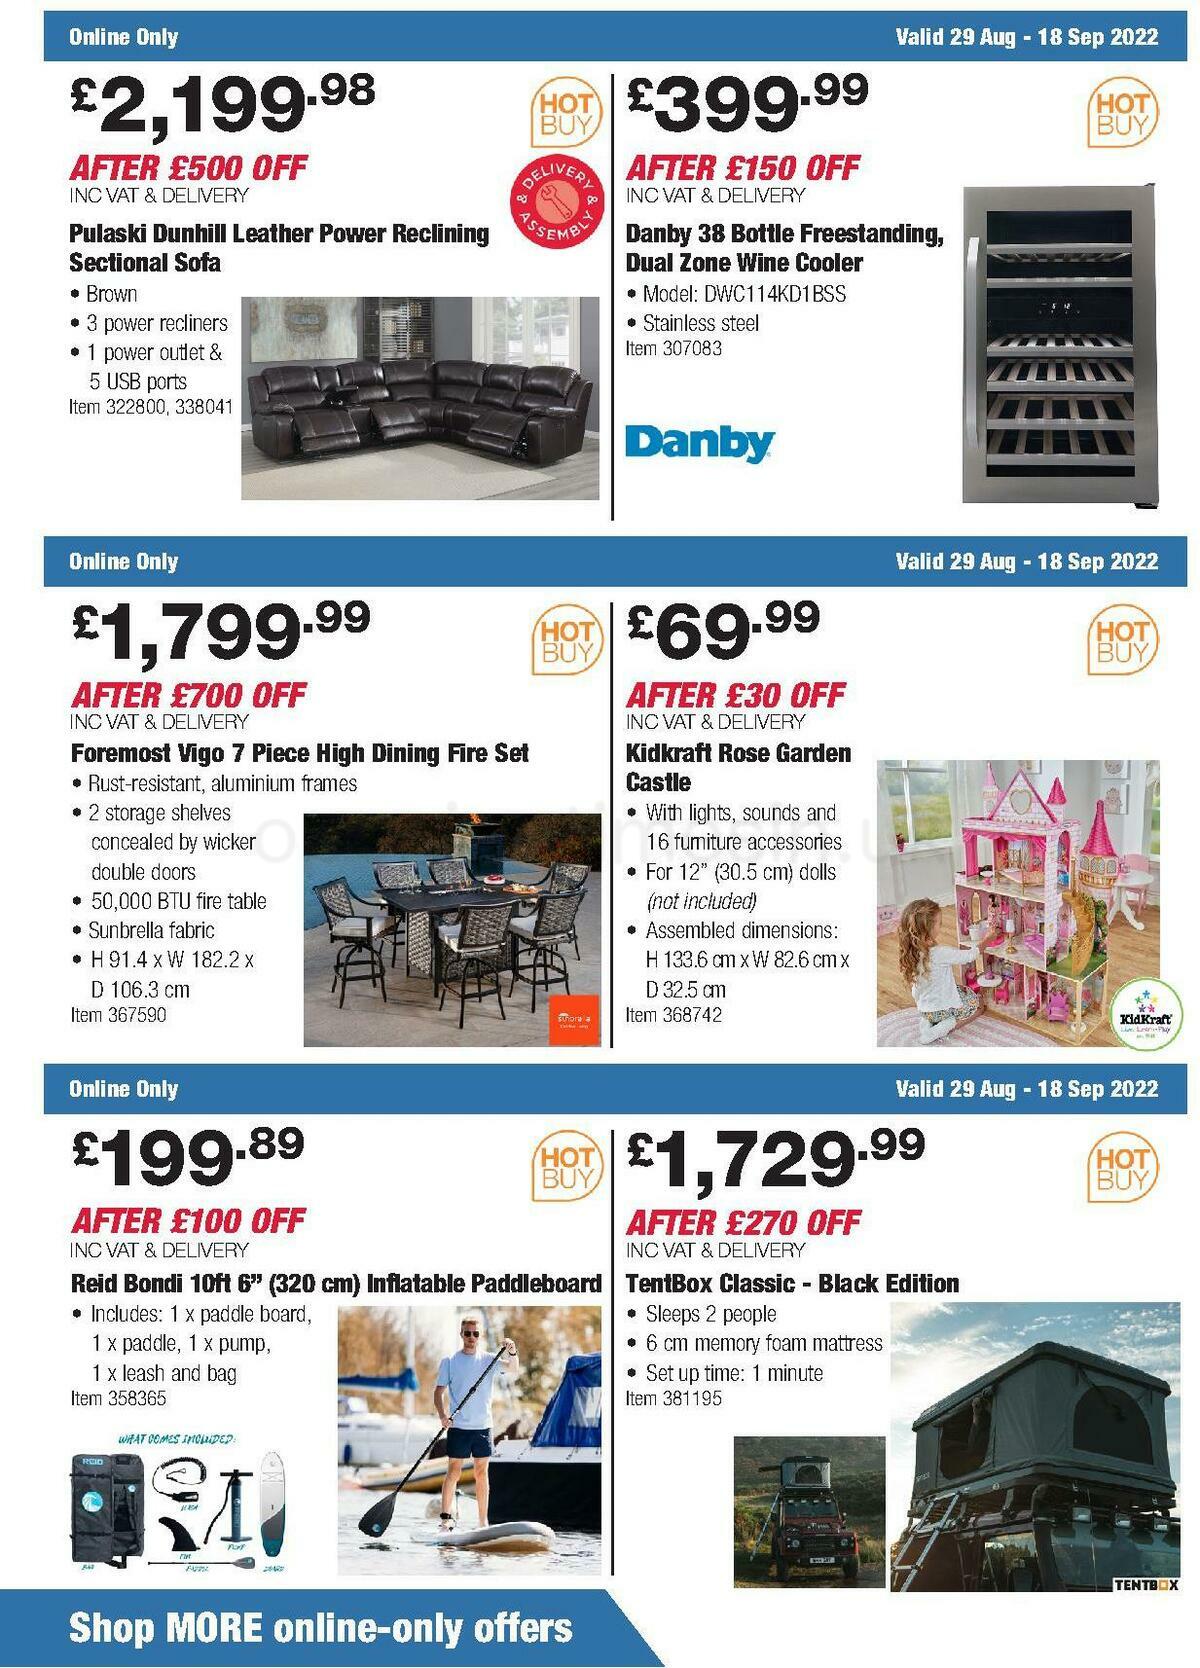 Costco Scotland & Wales Offers from 29 August